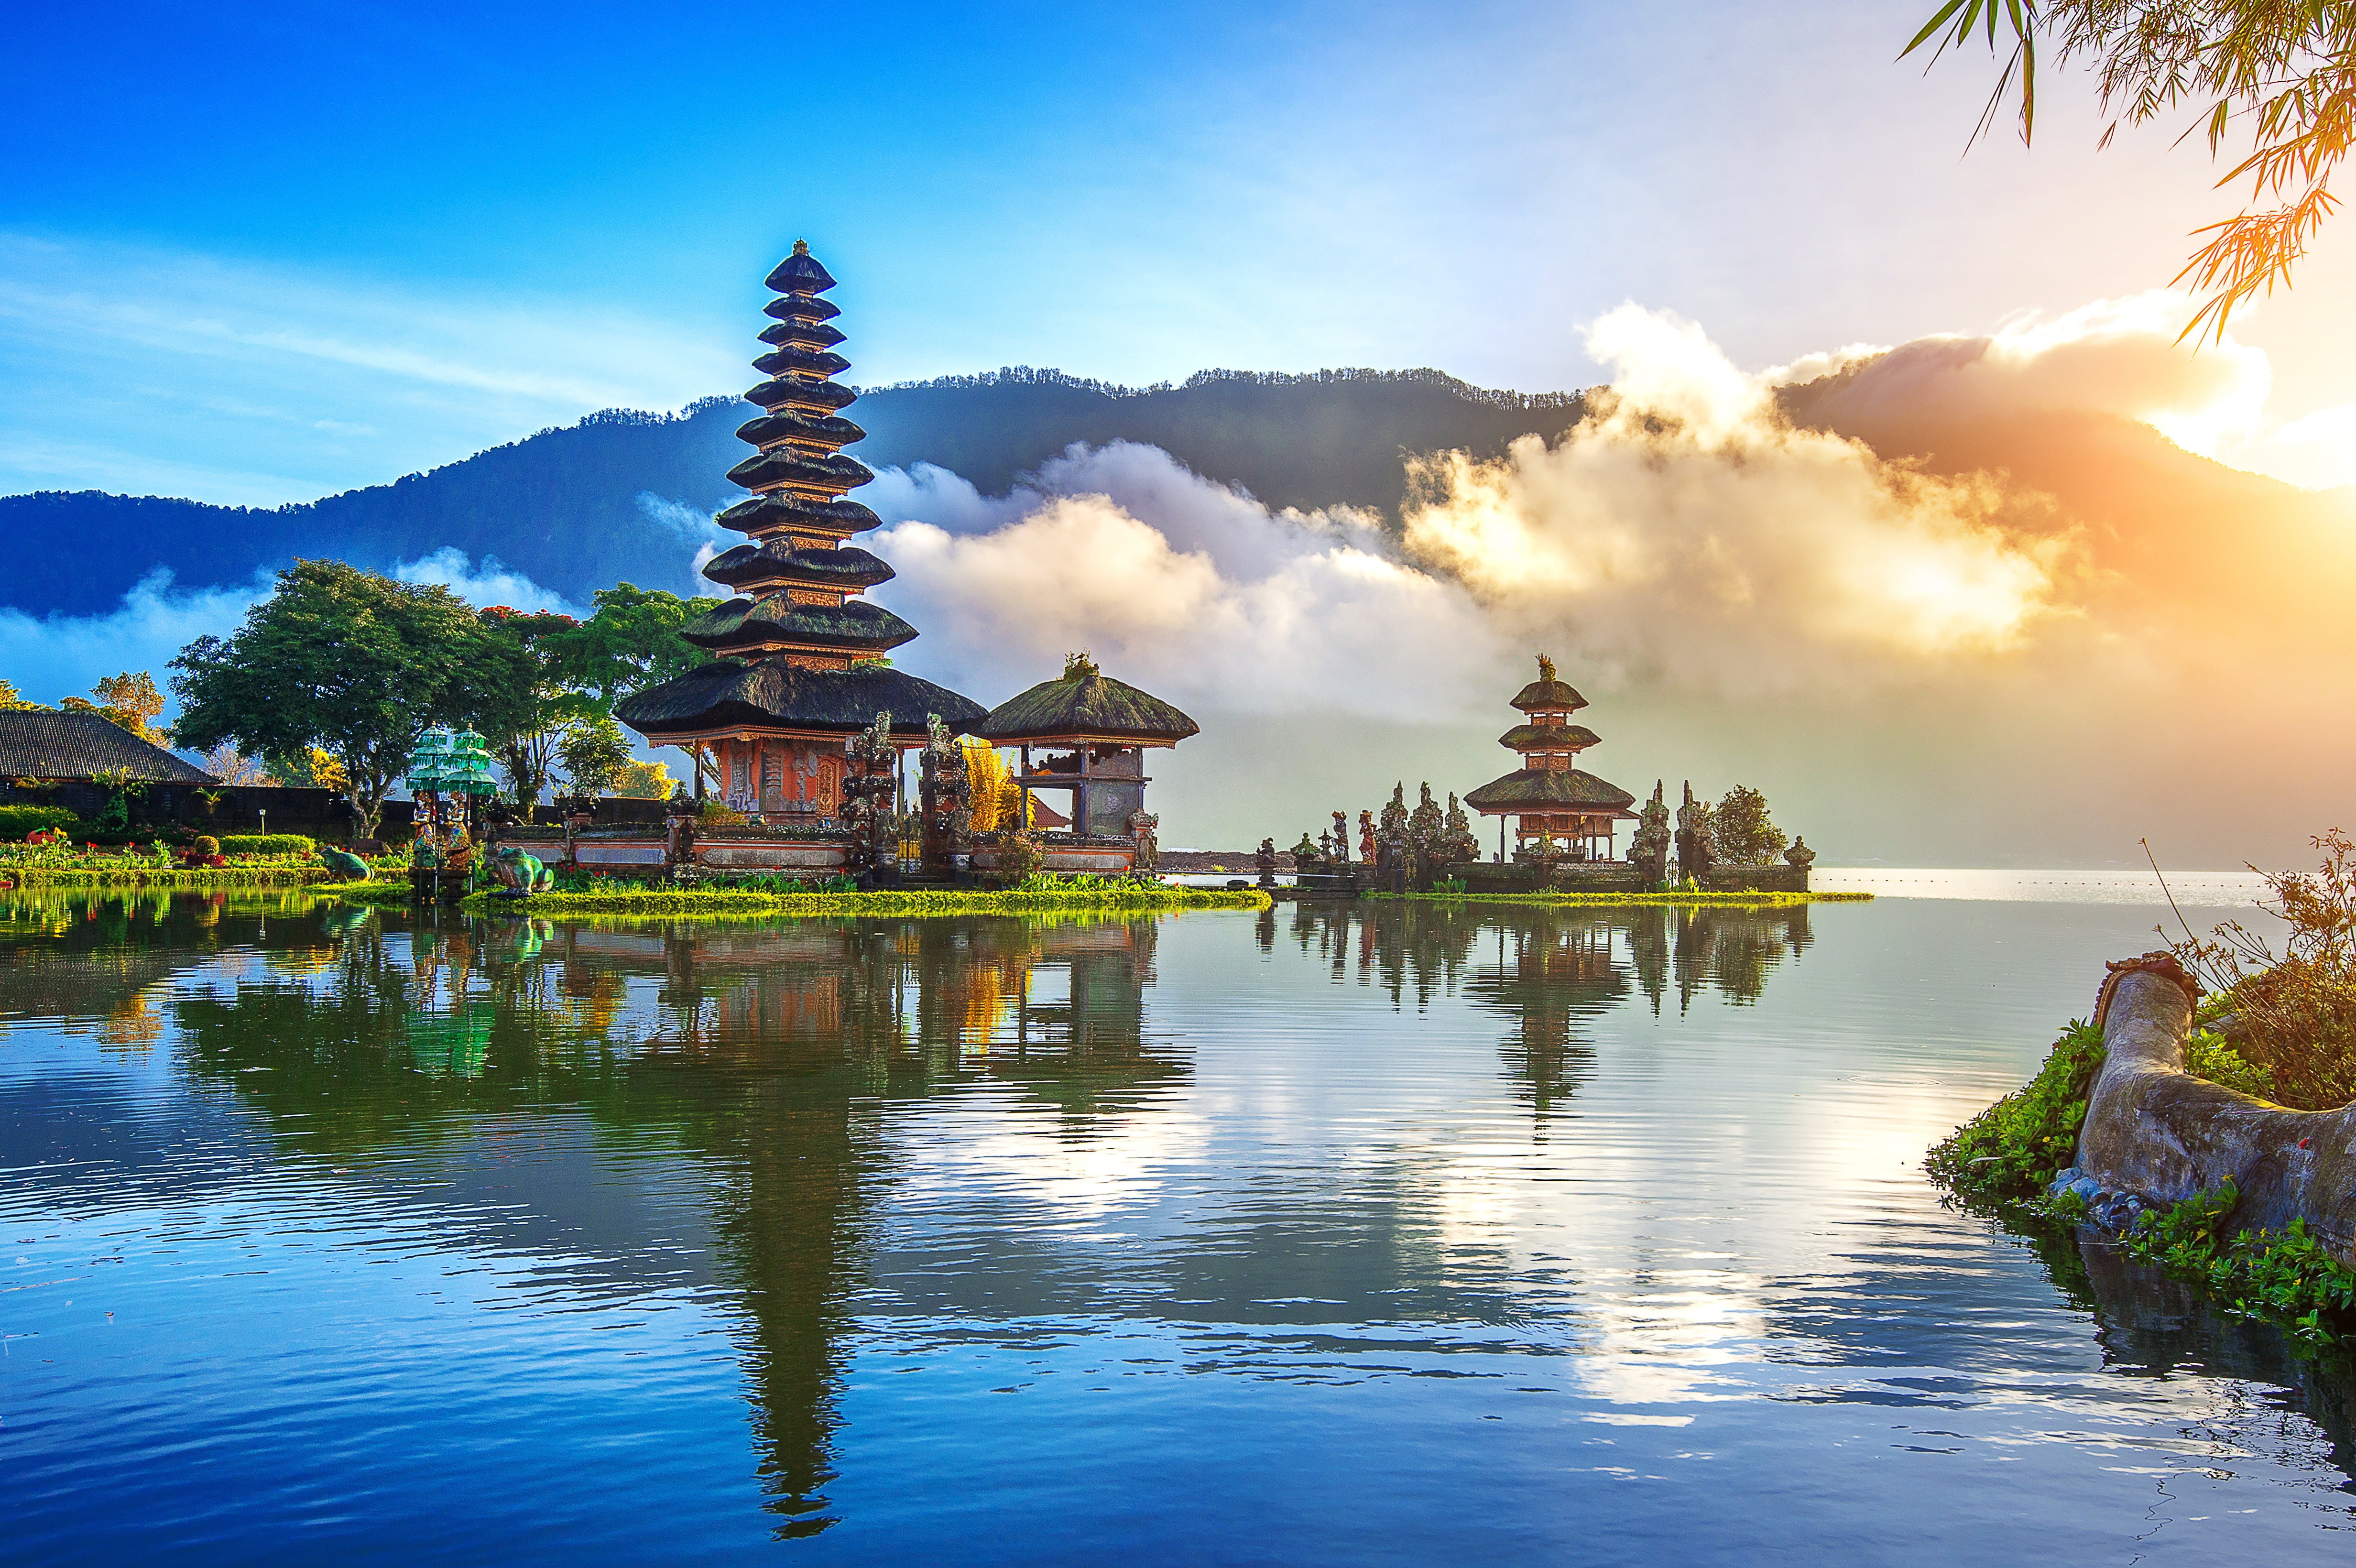 Temples in Bali, Indonesia